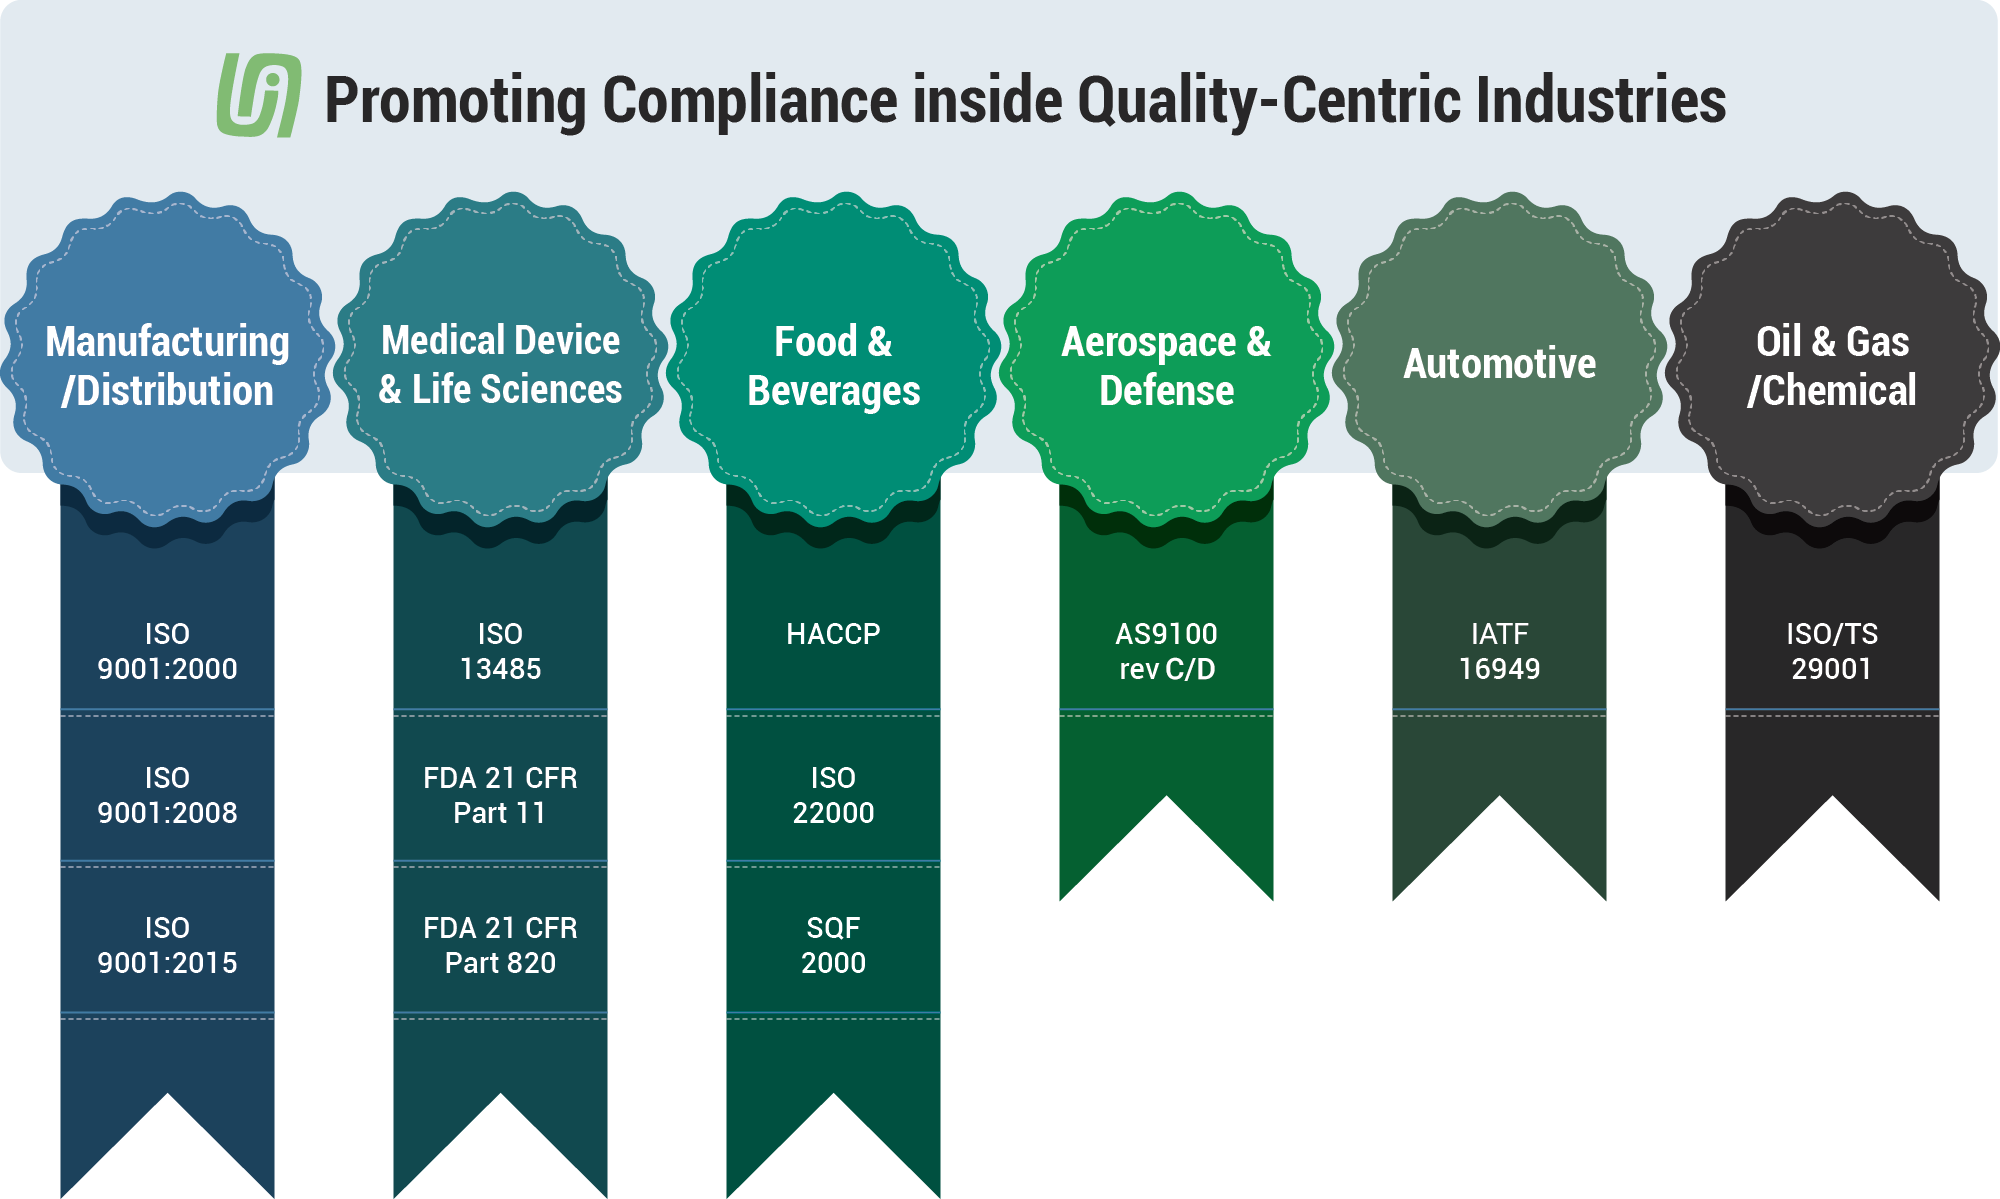 Promoting Compliance inside Quality-Centric Industries